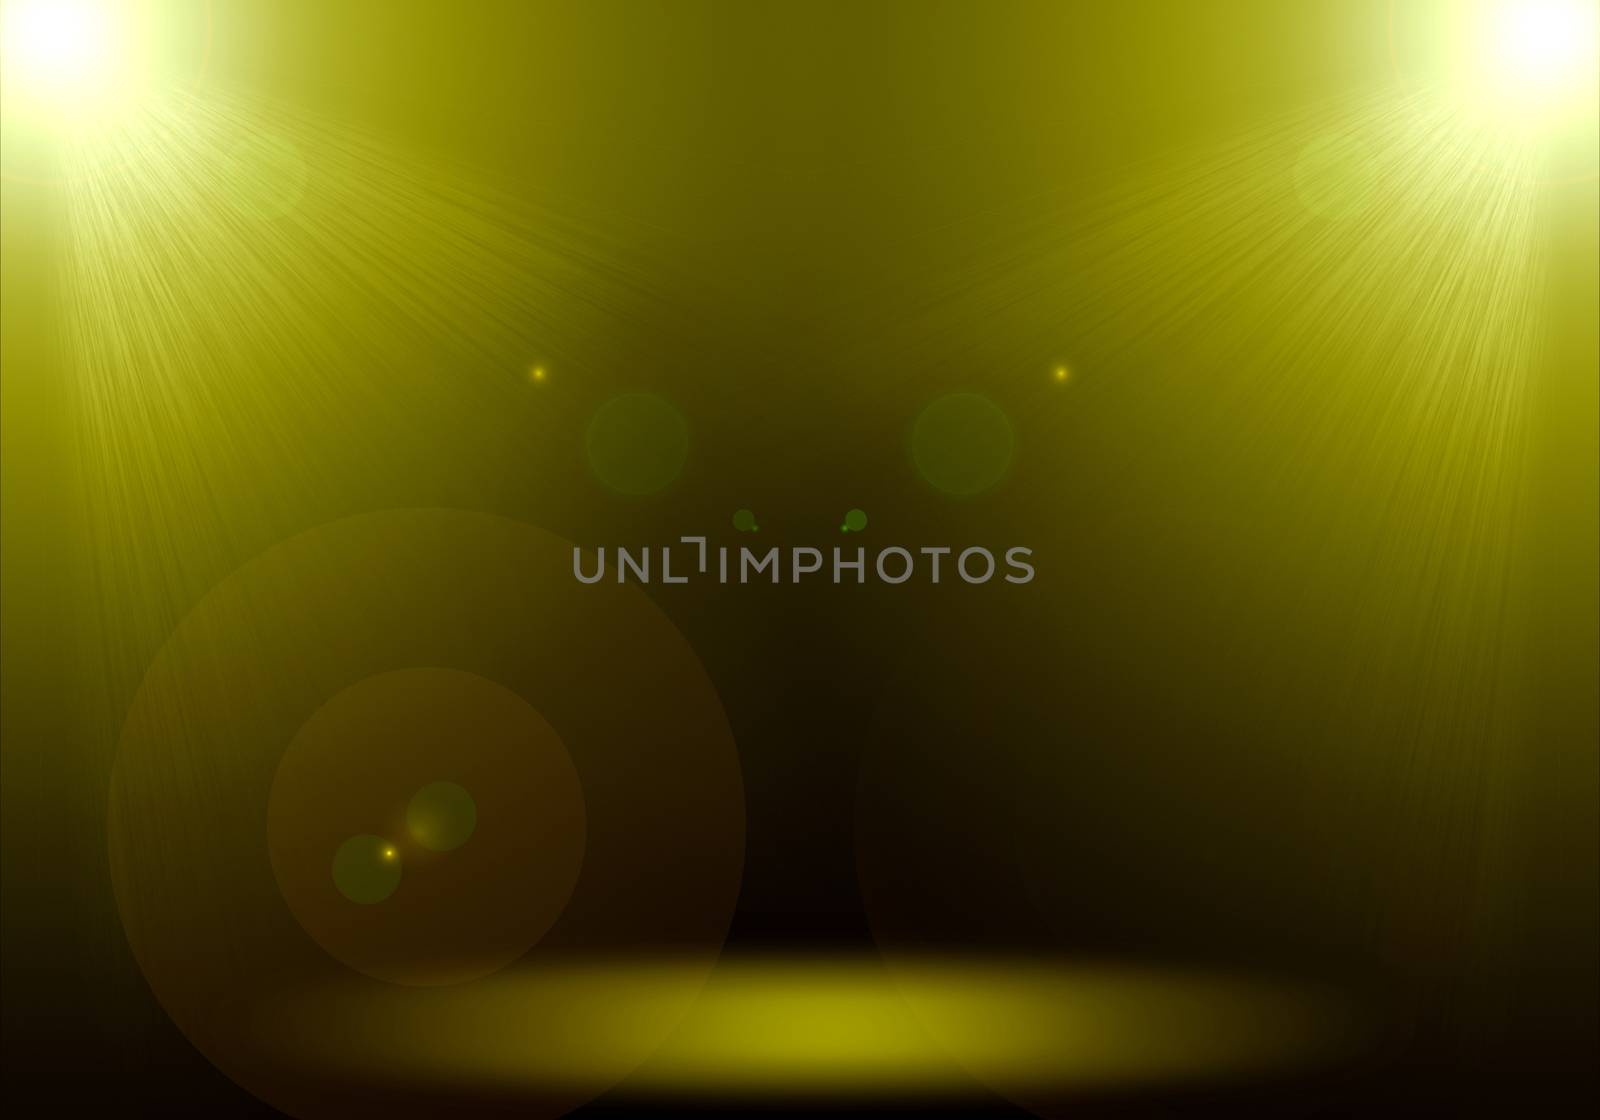 Abstract image of gold lighting flare 2 spotlight on the floor stage.